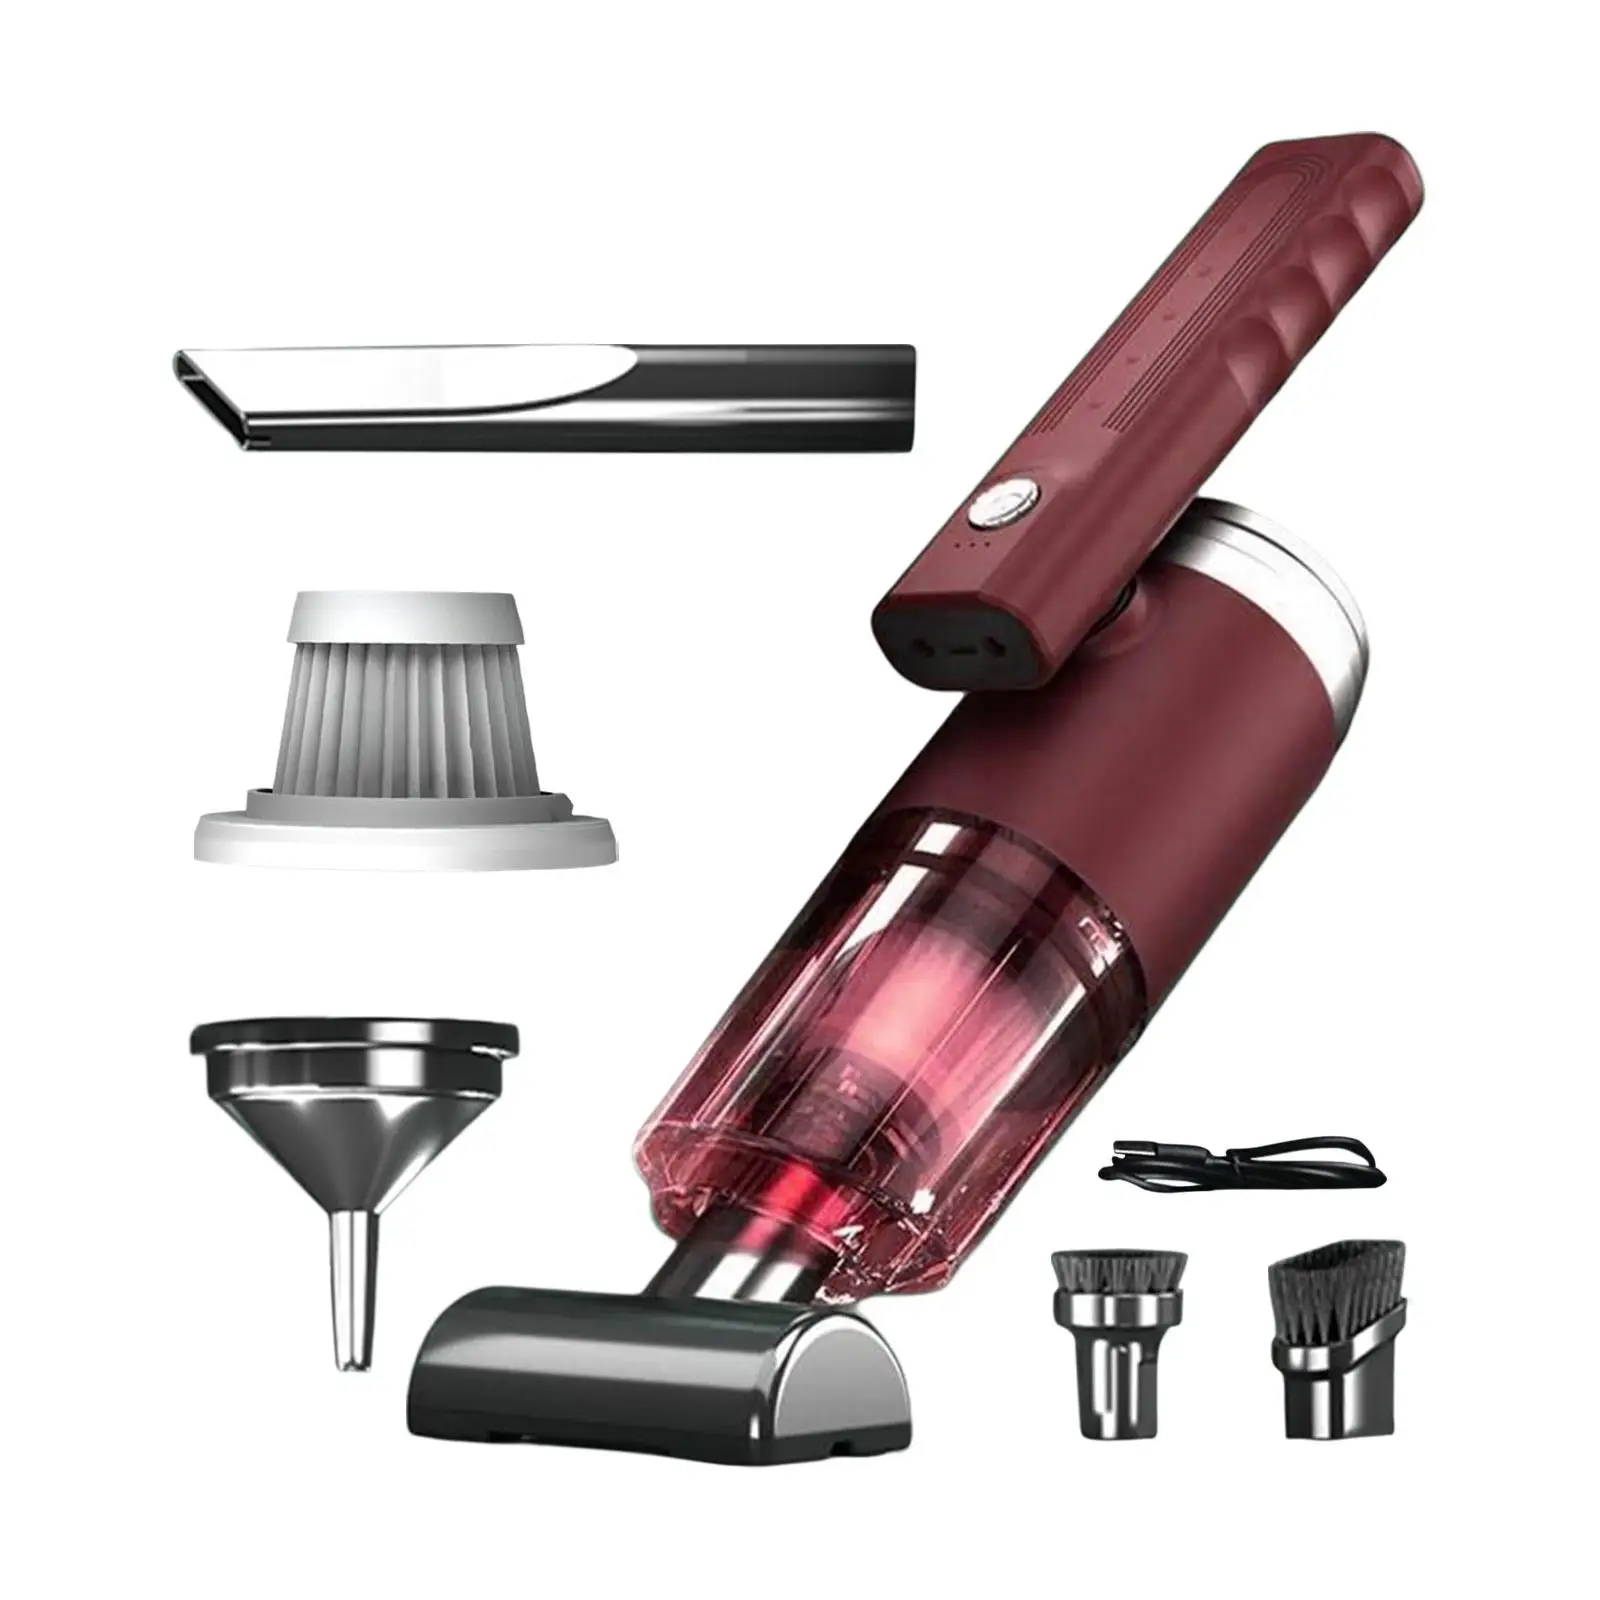 Car Vacuum Cleaner, Mini Vacuum Cleaner, Rechargeable Dust Collector Powerful